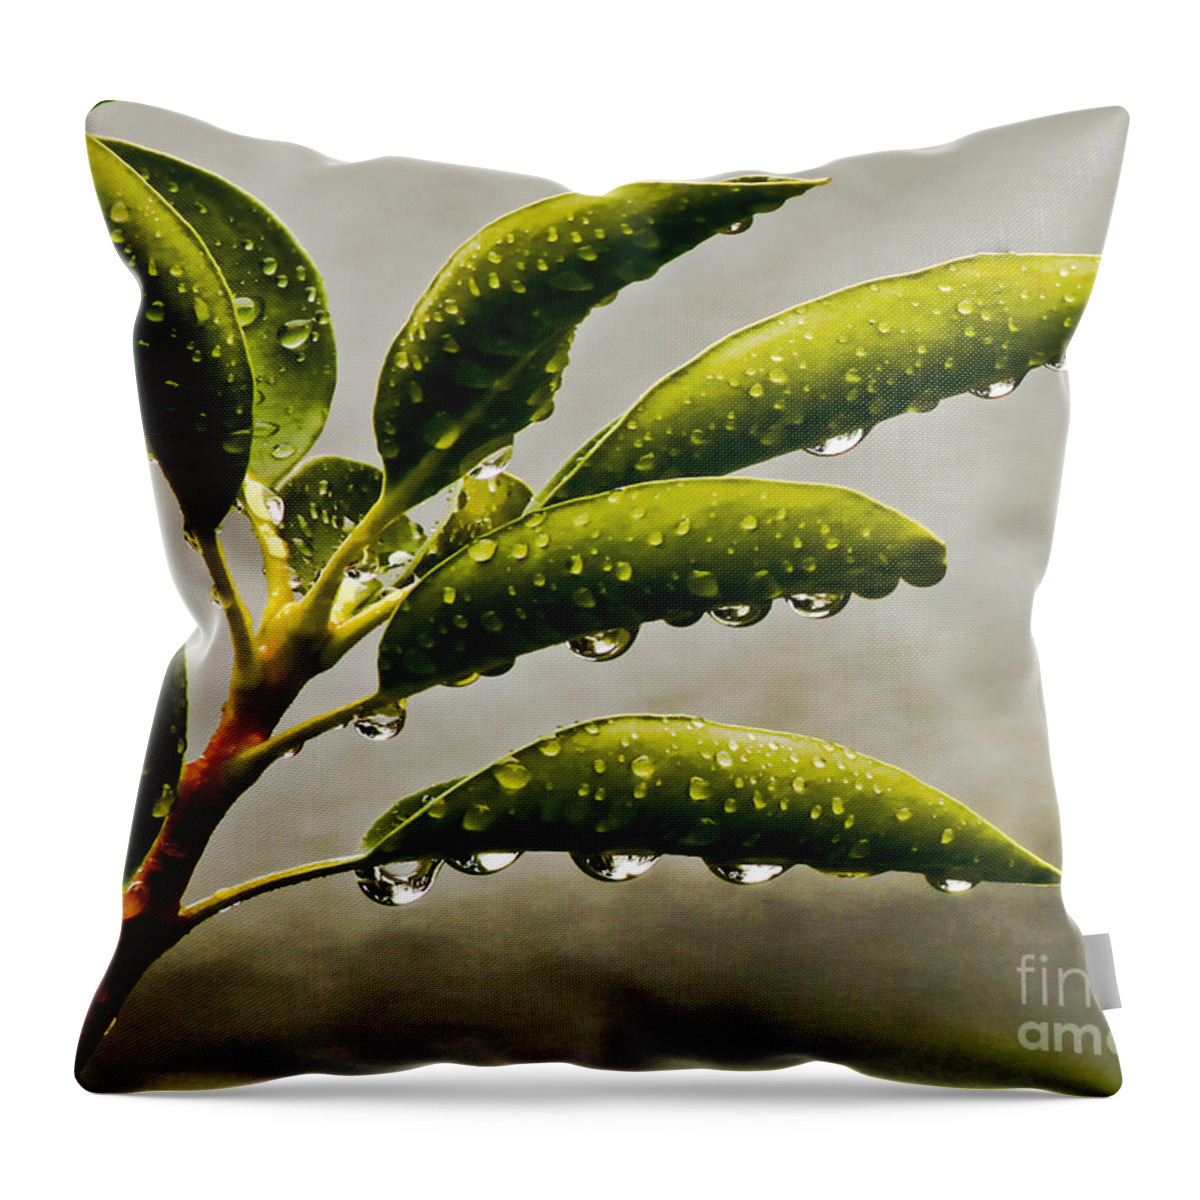 Wet Throw Pillow featuring the photograph Early Morning Raindrops by Carol F Austin